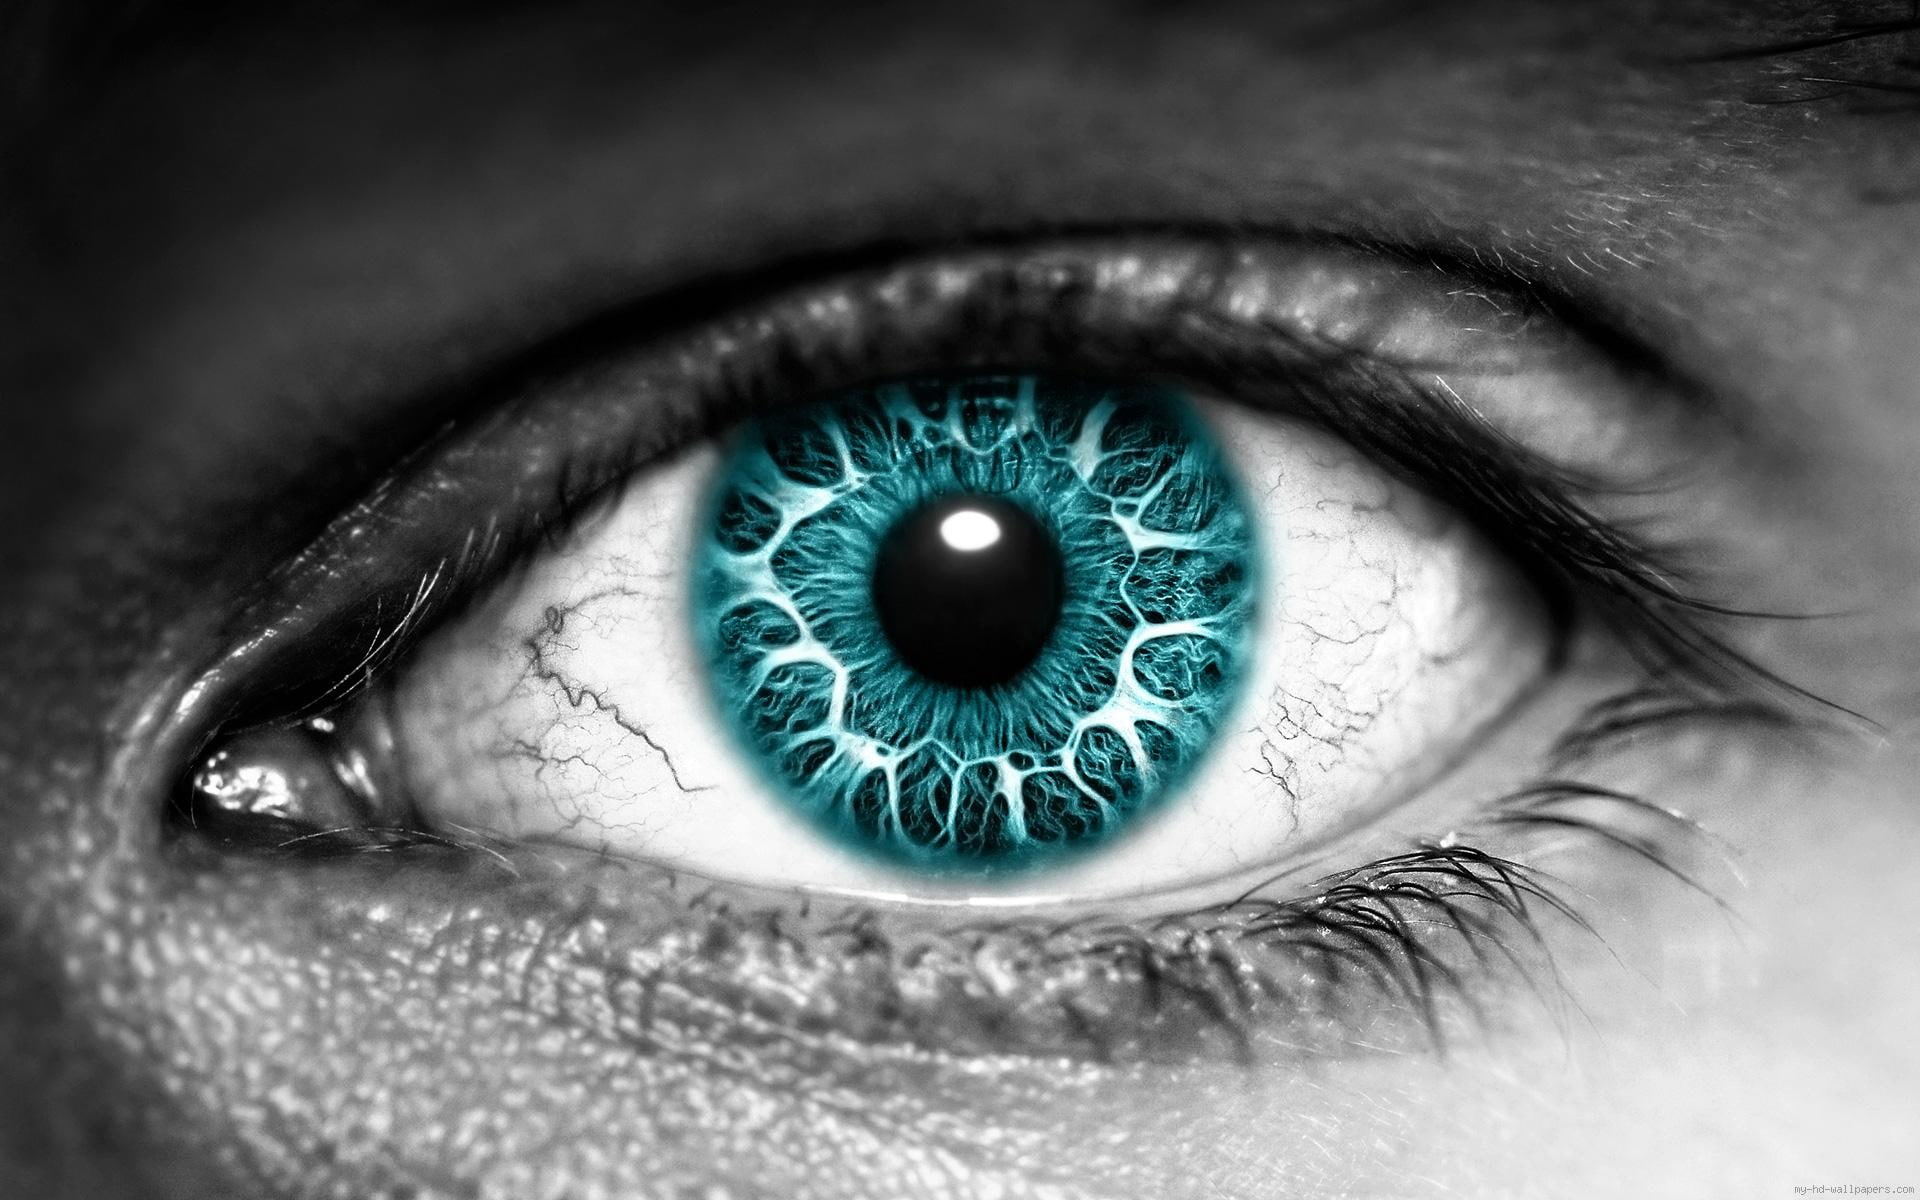 Blue eye on black and white face, blue contact lens, graphic